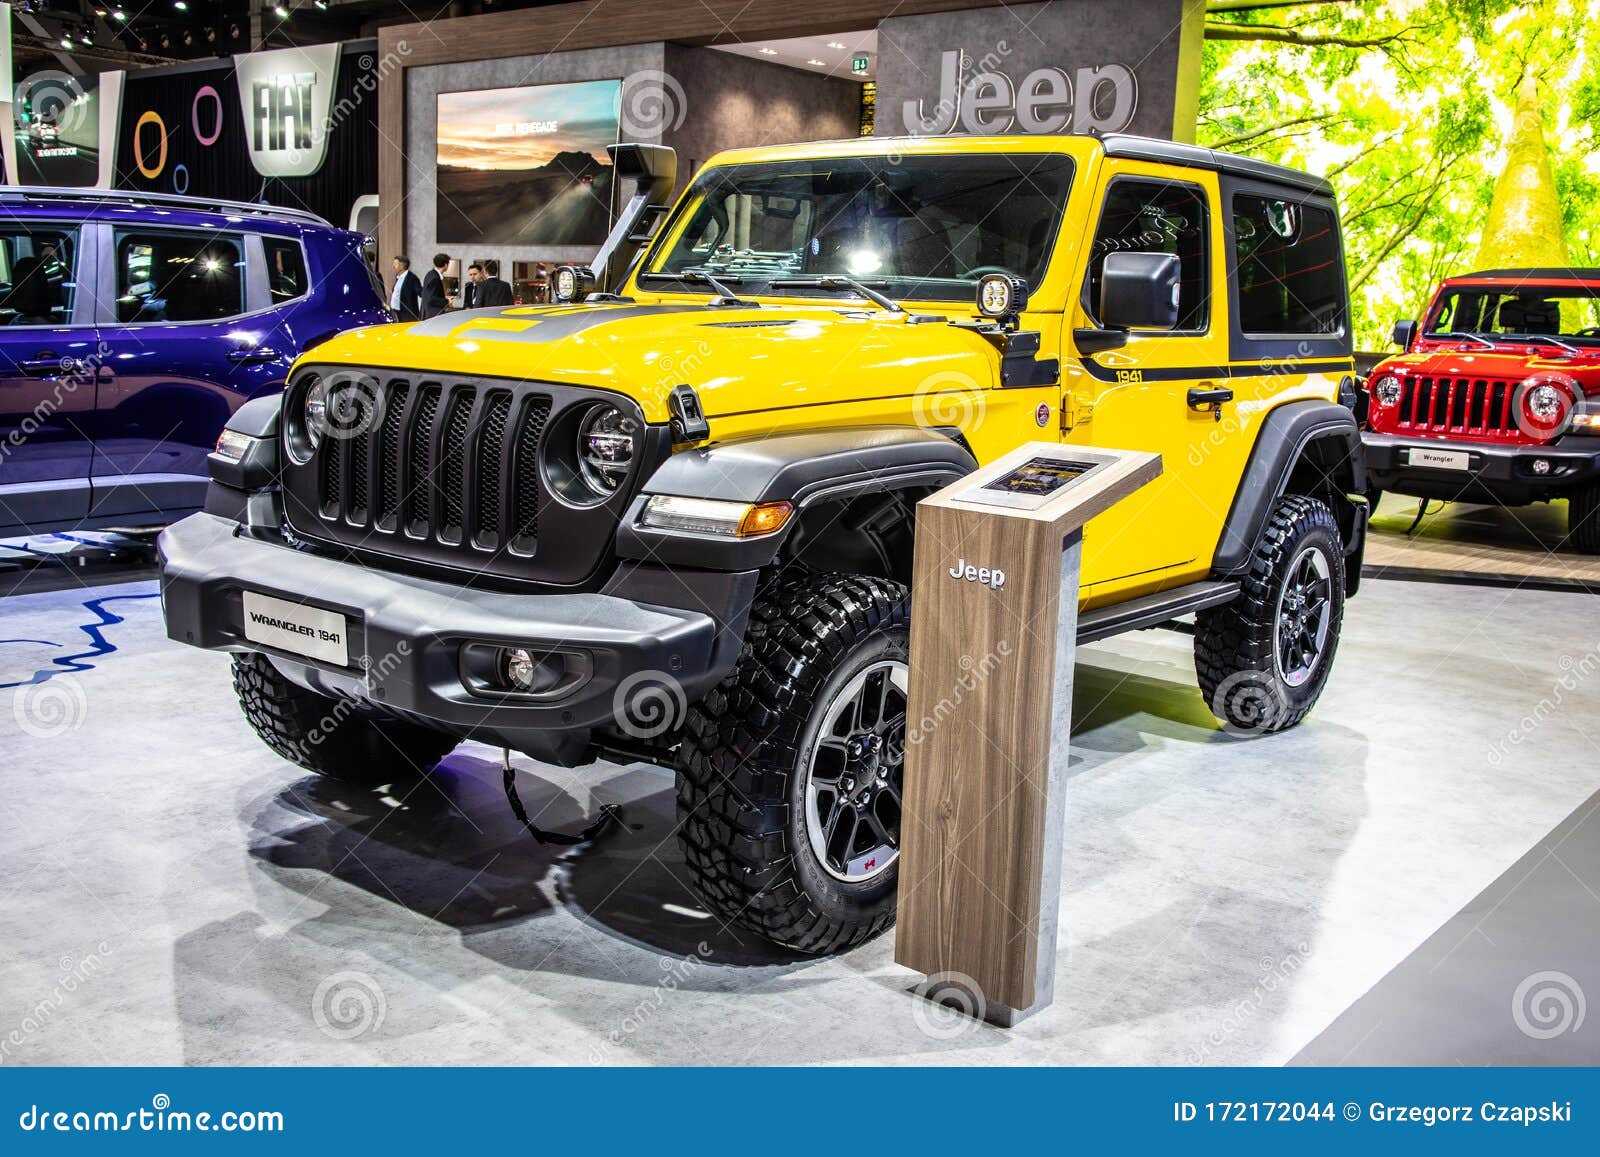 Jeep Wrangler 1941 Edition at Brussels Motor Show, Fourth Generation, JL,  Four-wheel Drive Off-road Jeep Vehicle Editorial Stock Image - Image of jeep,  automotiveshow: 172172044